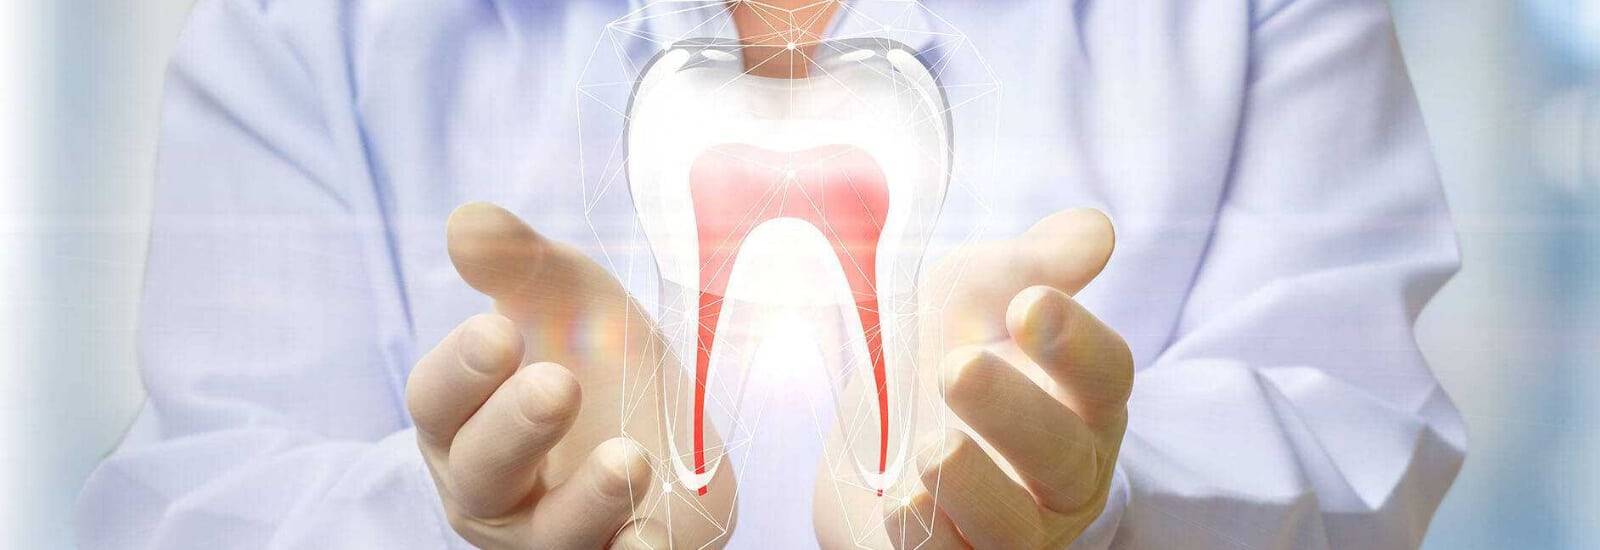 Best Root Canal Treatment In Mumbai Near Me | Root Canal ...